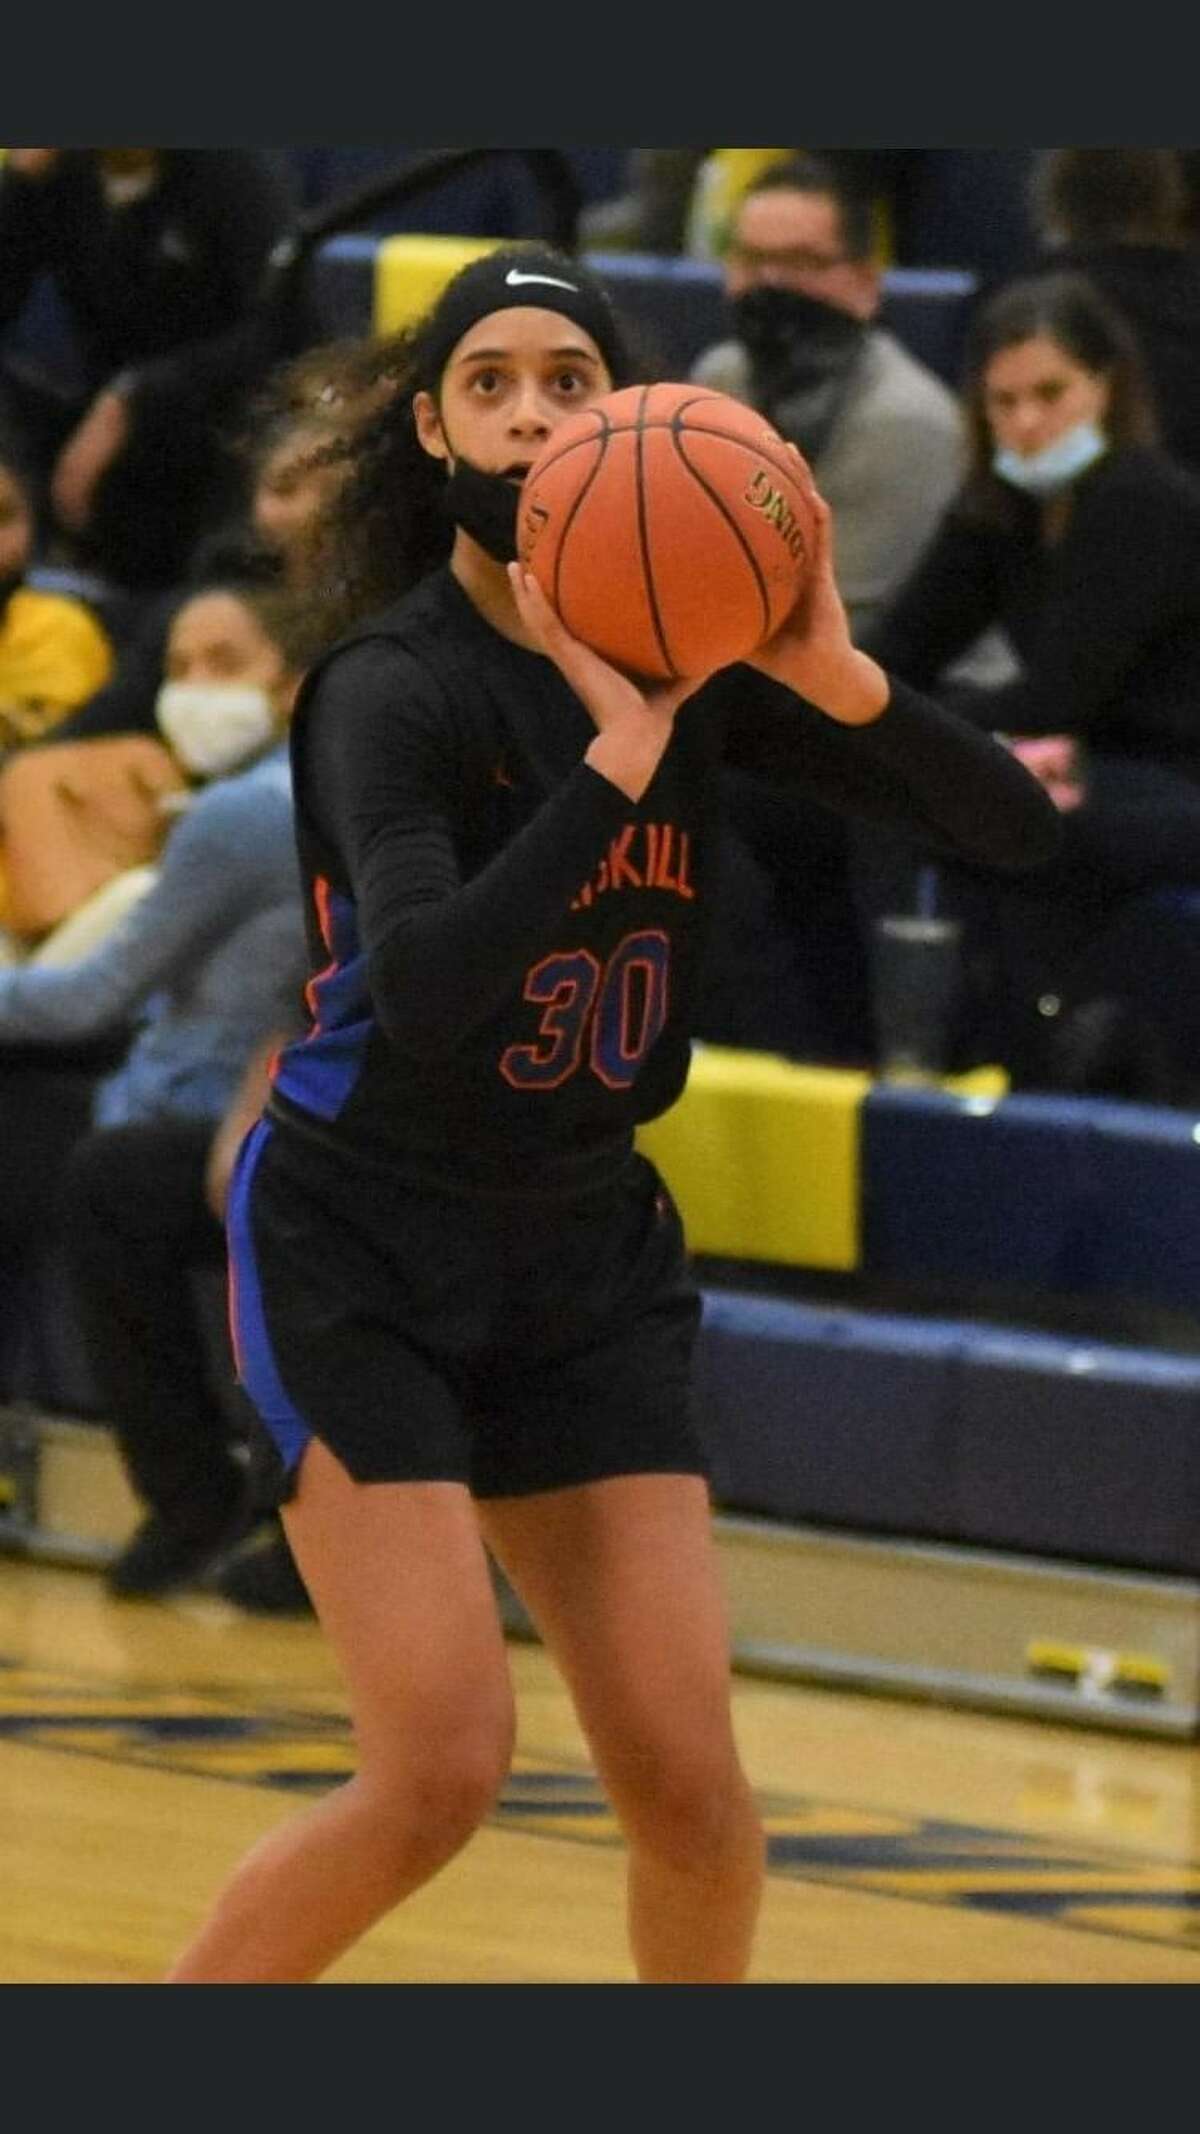 Catskill's Janay Brantley averaged 27.5 points, 10.5 rebounds and 7.0 assists in a pair of early-season wins to earn Athlete of the Week honors.